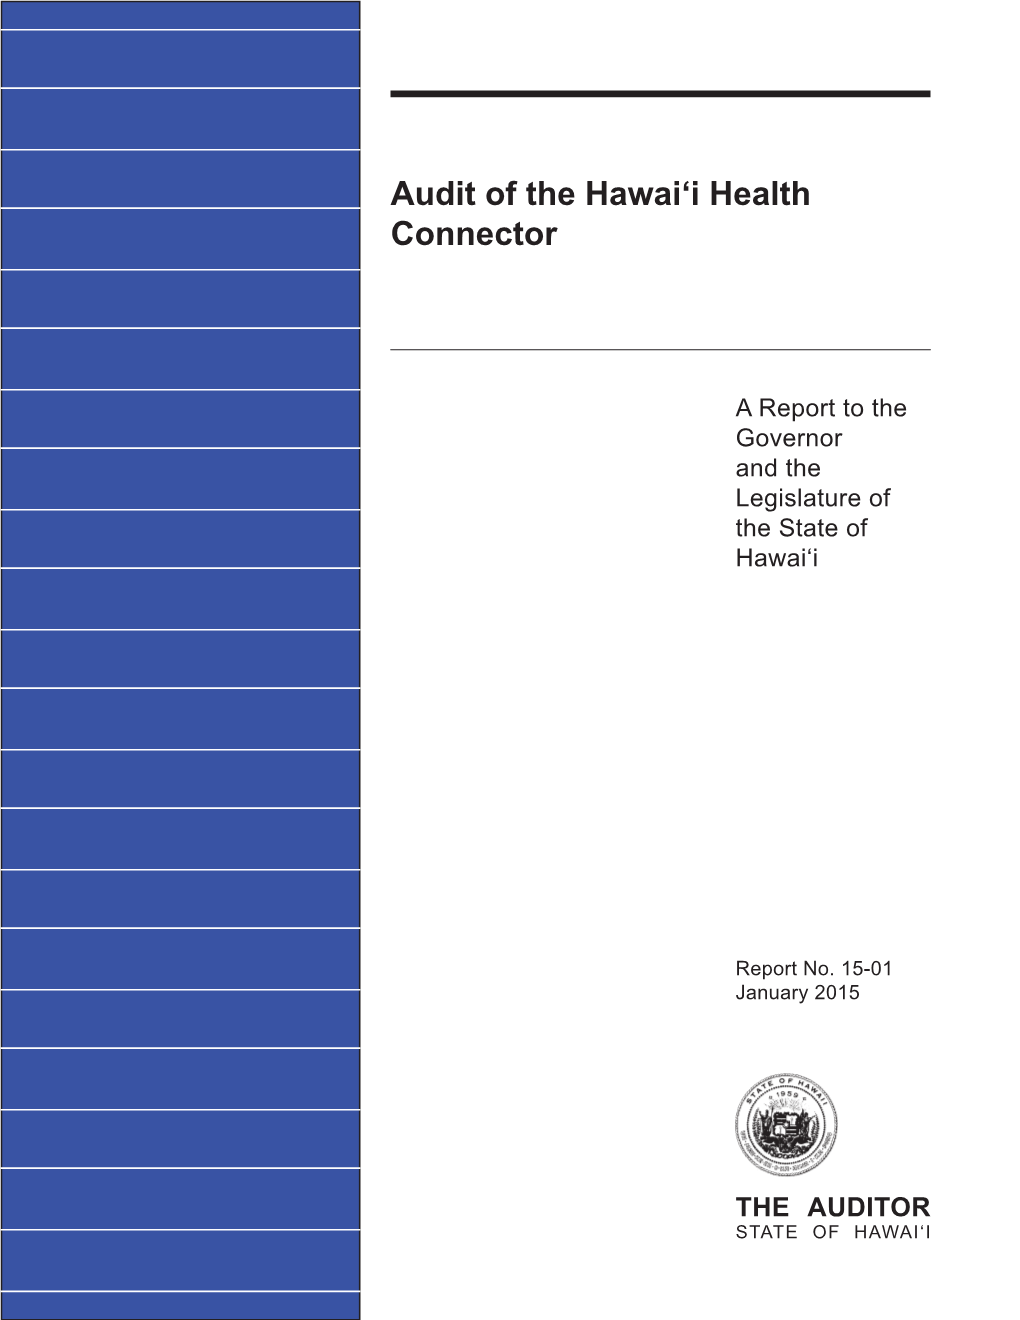 Audit of the Hawai'i Health Connector